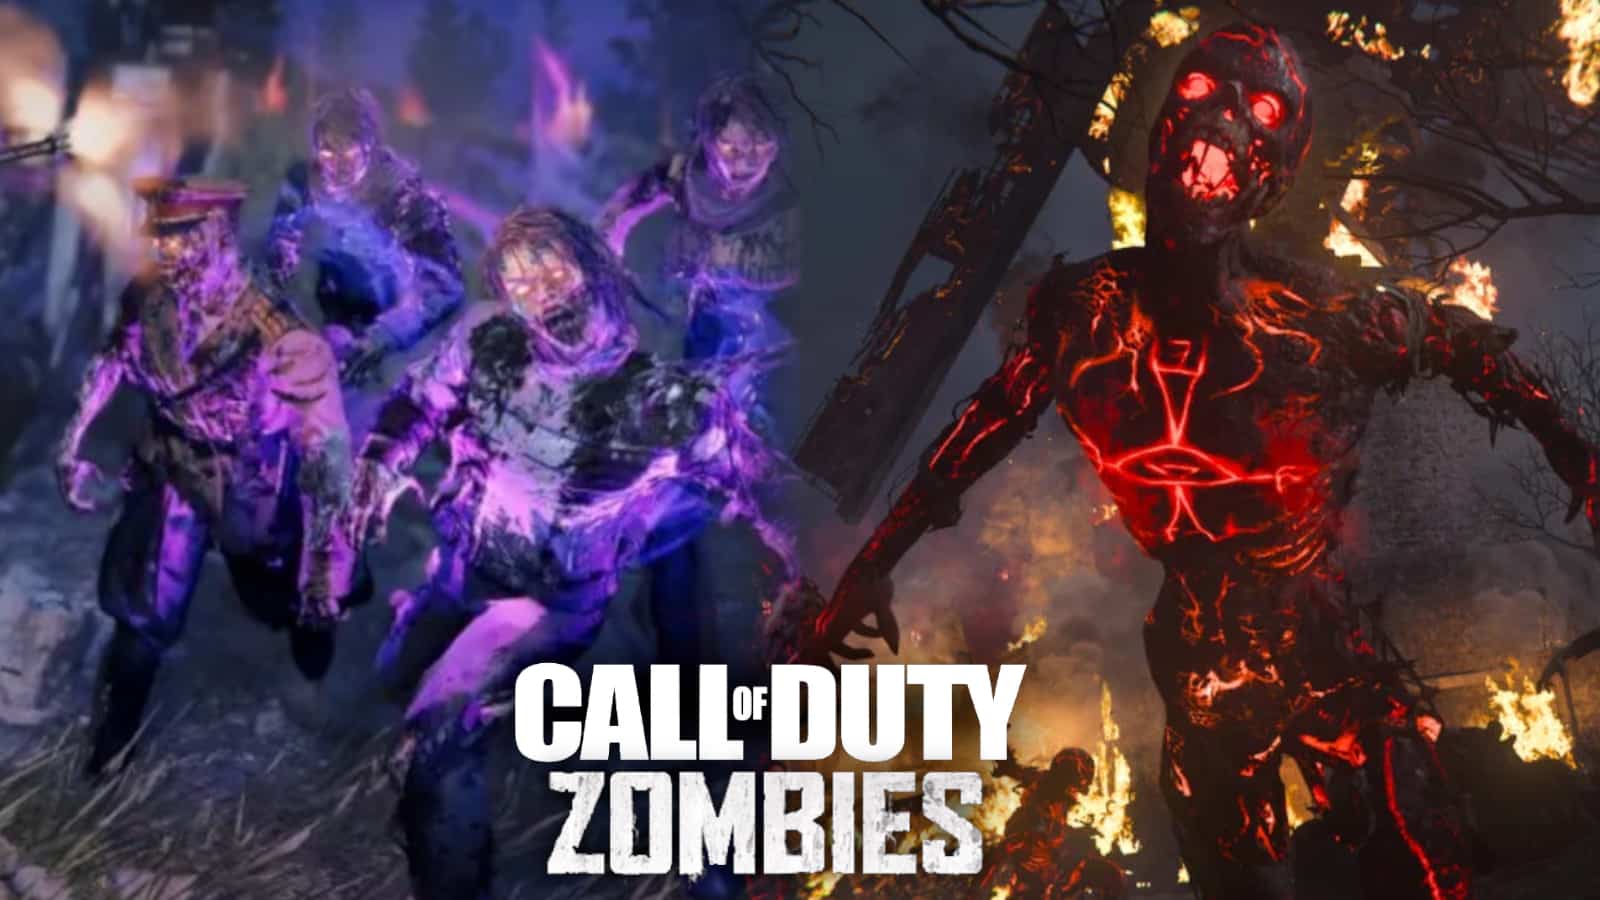 Zombies players want Treyarch to update Cold War over trash Vanguard